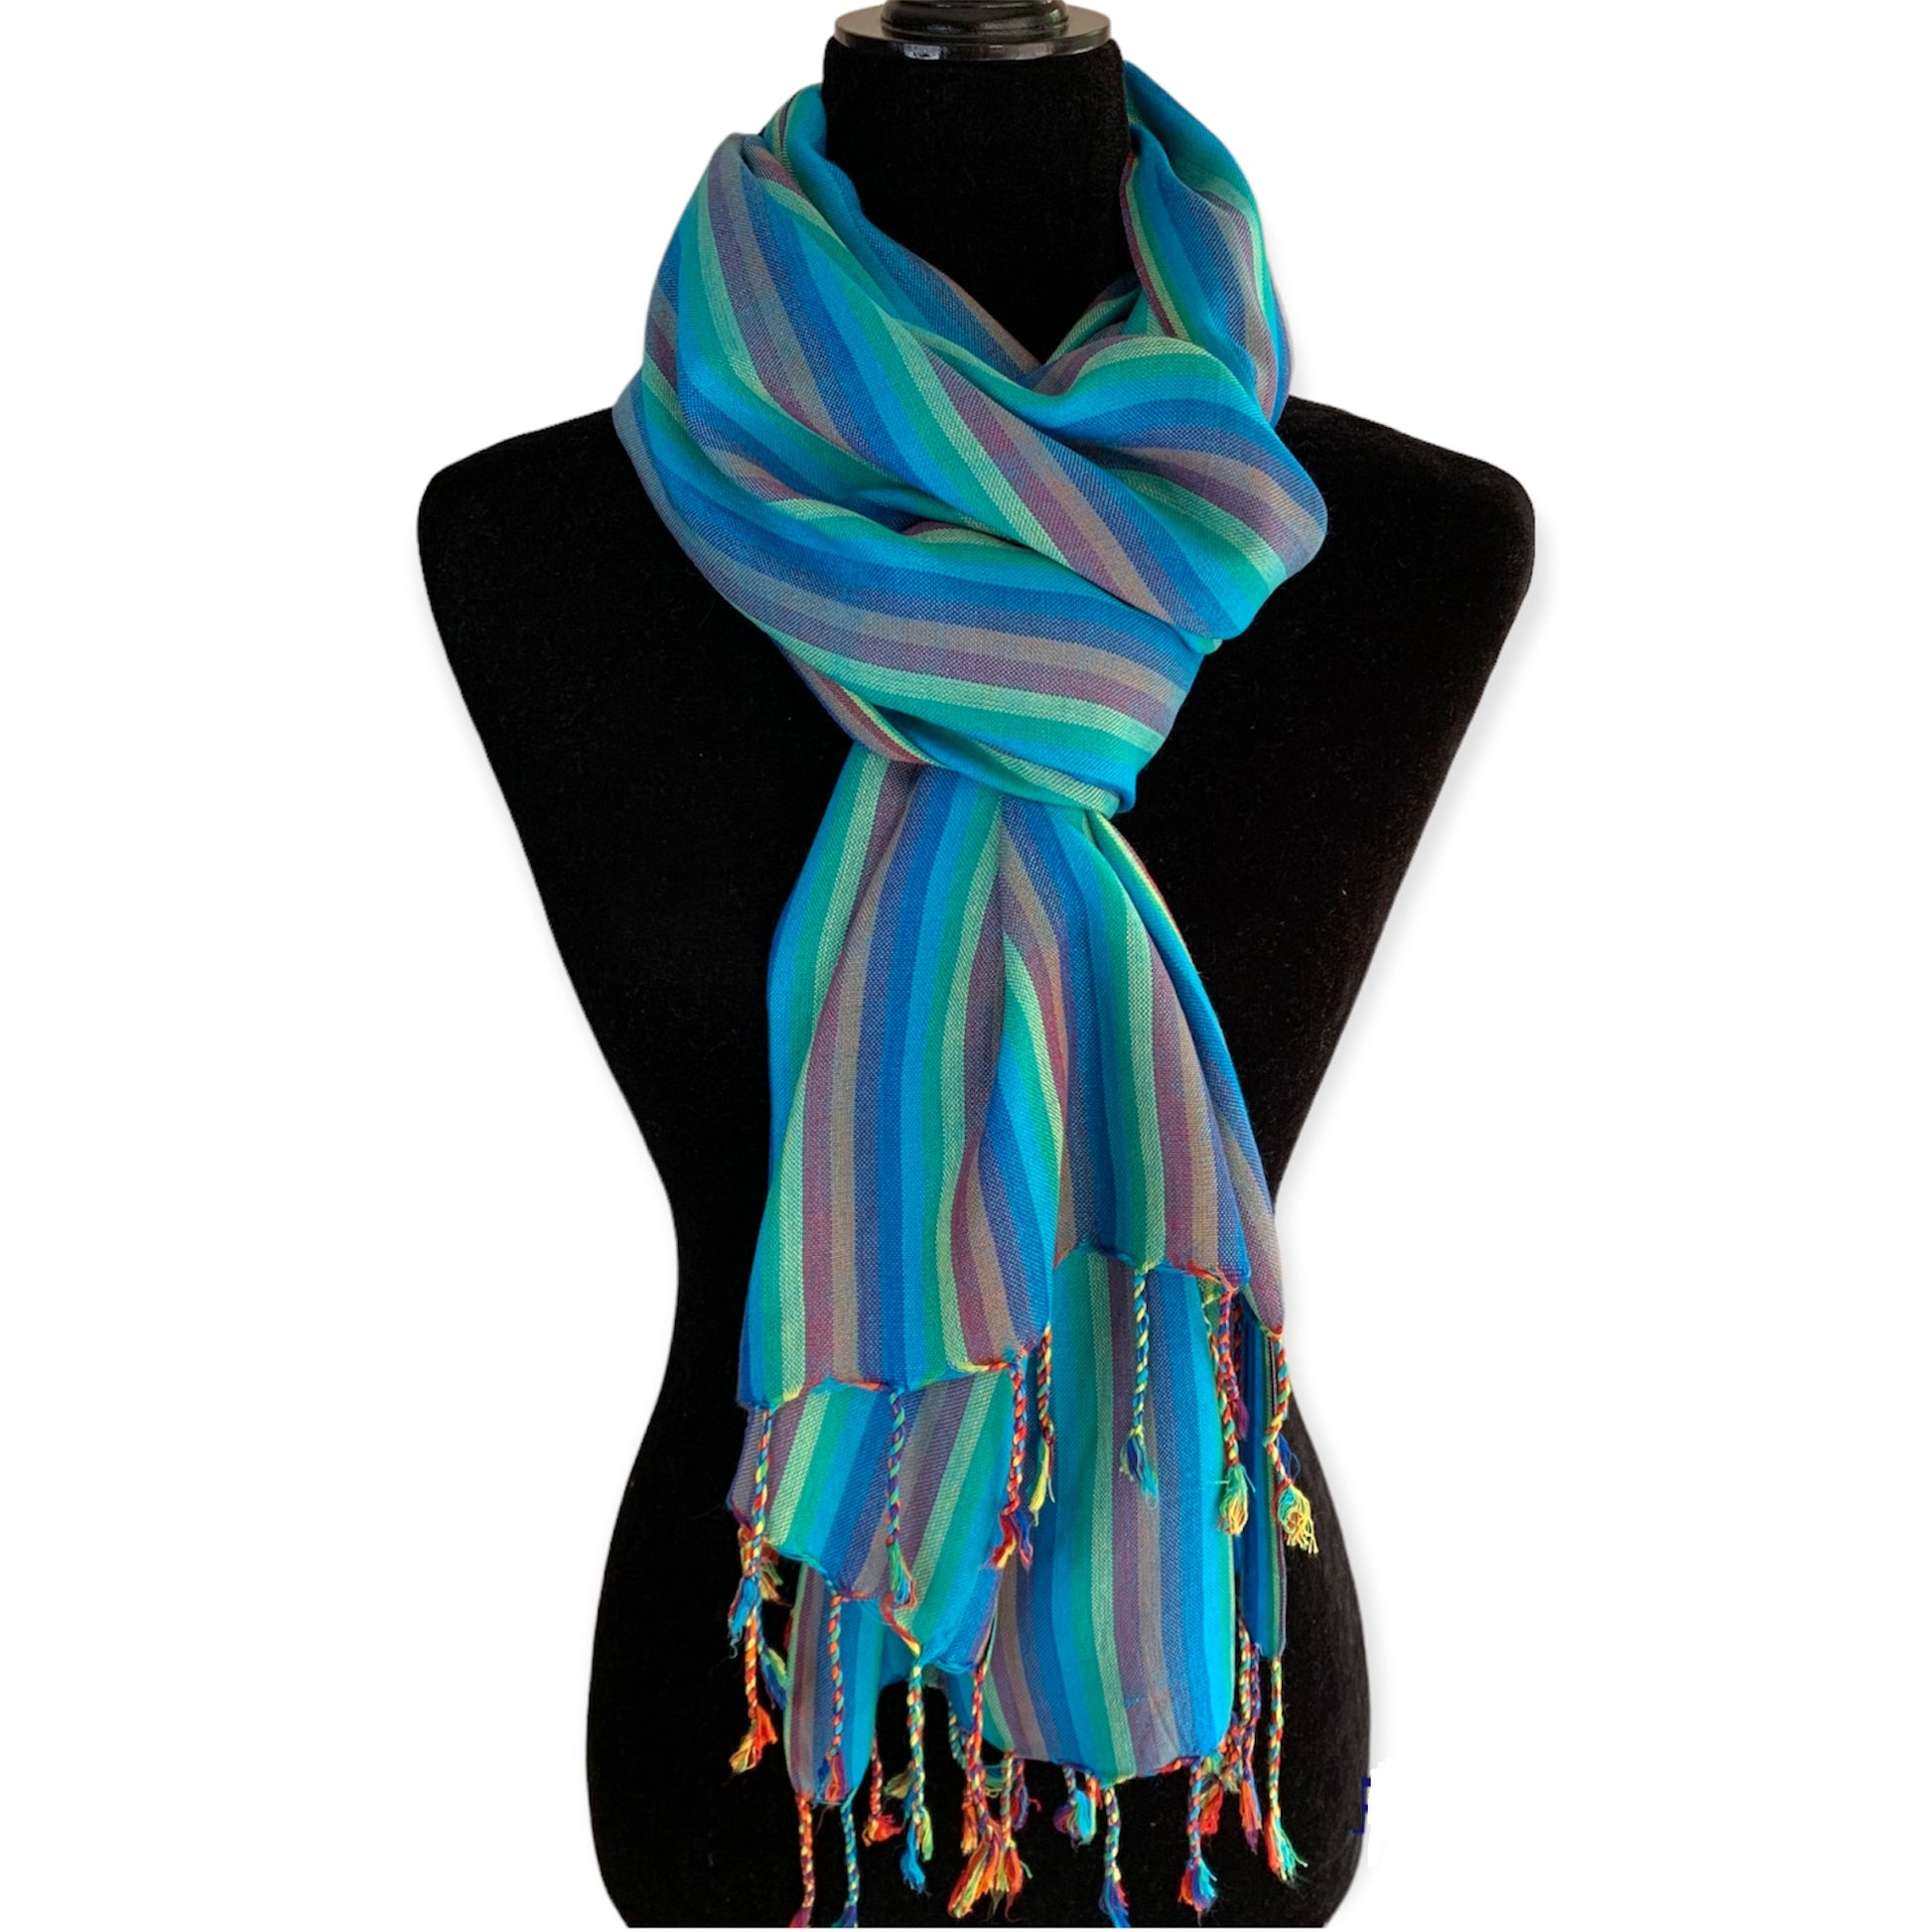 Striped Handwoven Bamboo Viscose Scarf - Turquoise & Yellow